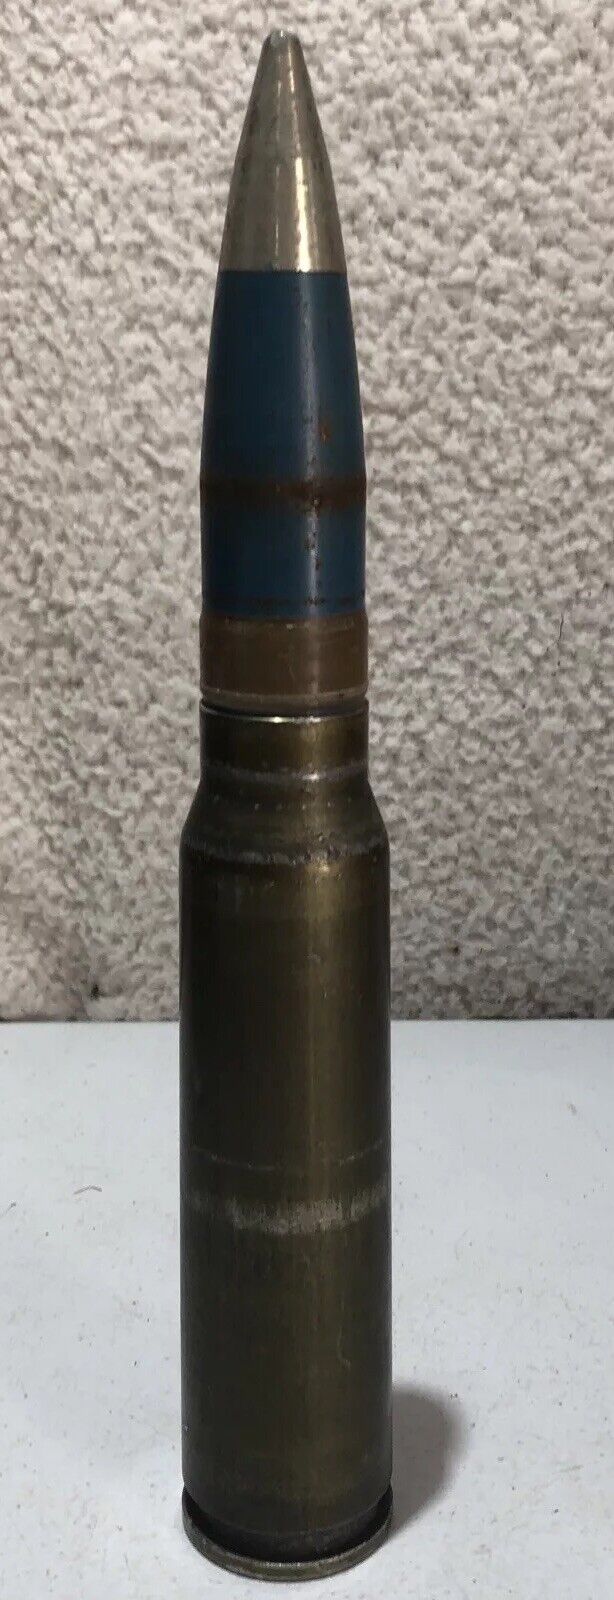 A-10 Warthog 30MM Cannon Collectors Dummy Round Cartridge 30x173